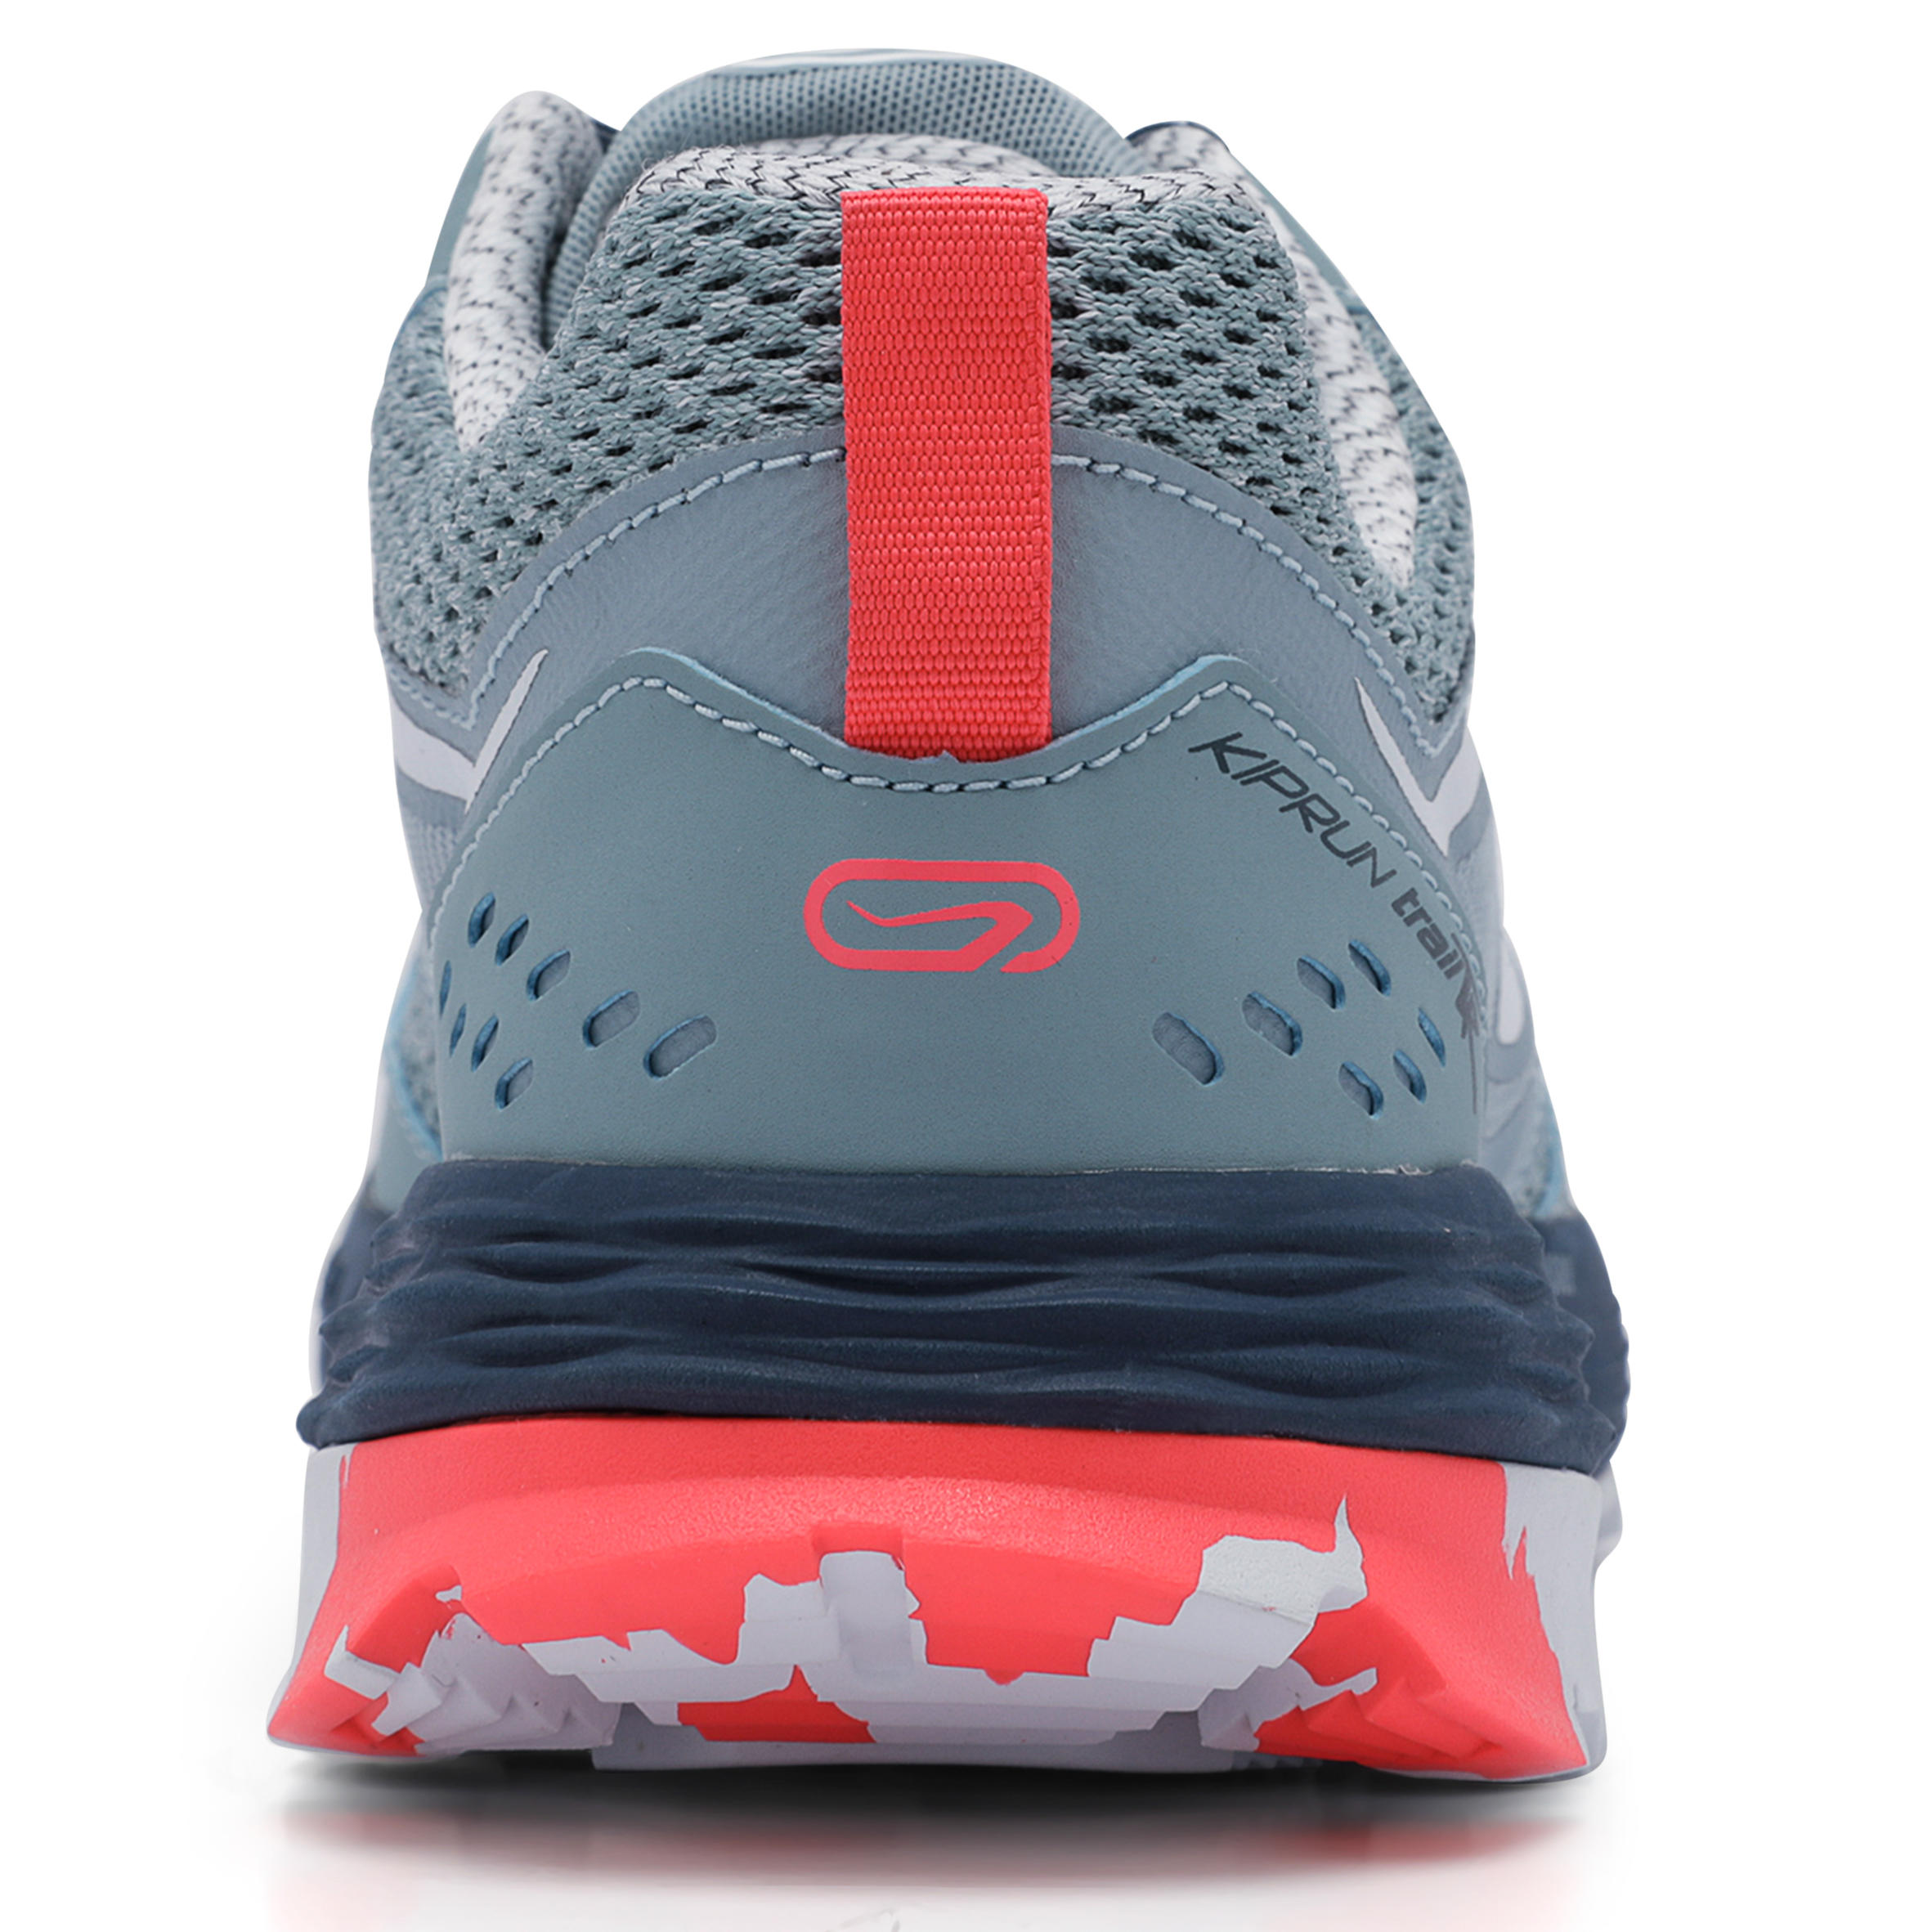 TRAIL RUNNING SHOES - LIGHT BLUE/PINK